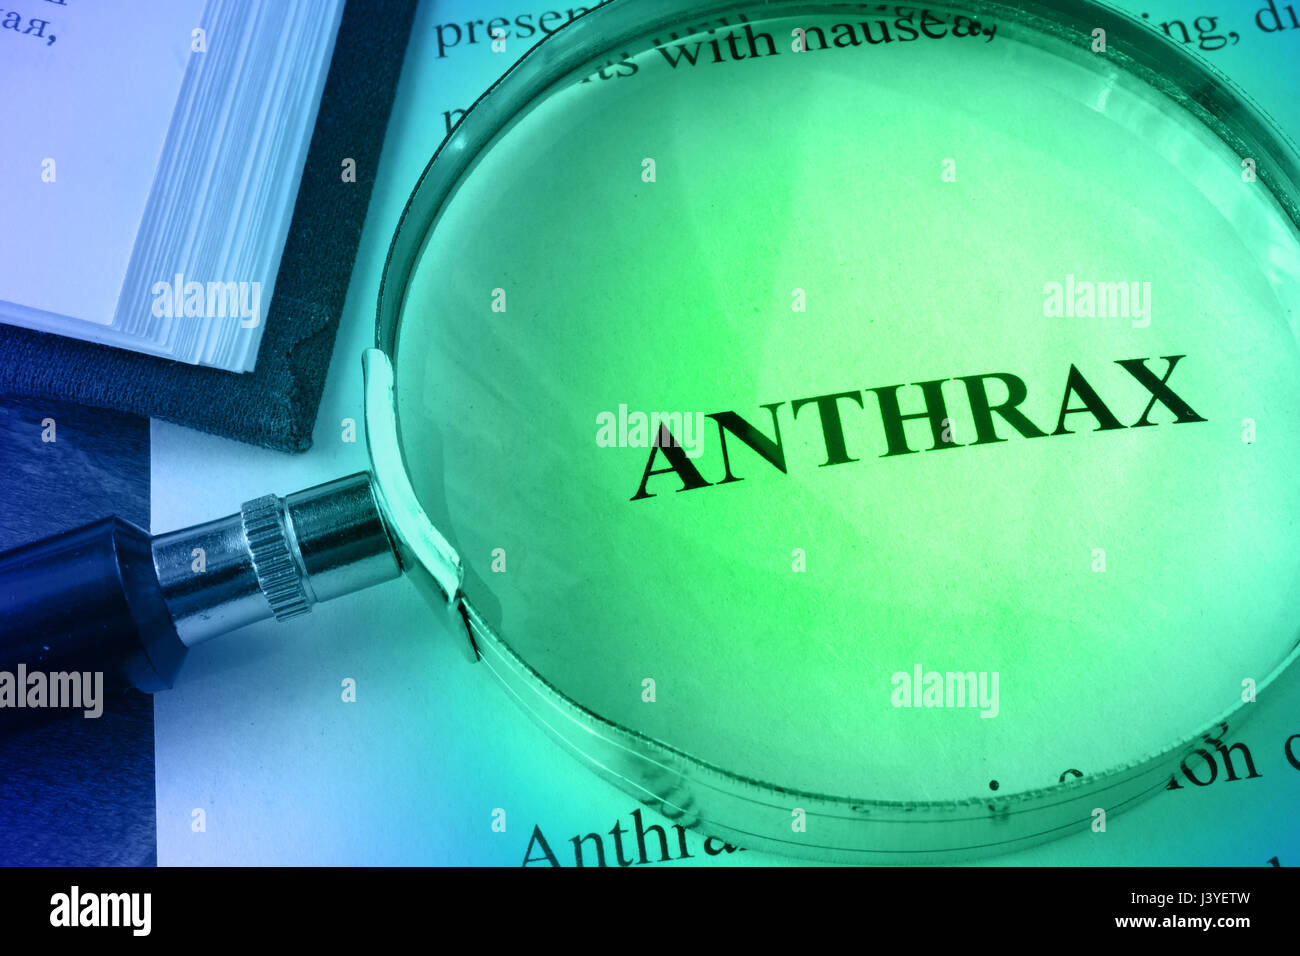 Document with word Anthrax in a hospital. Stock Photo